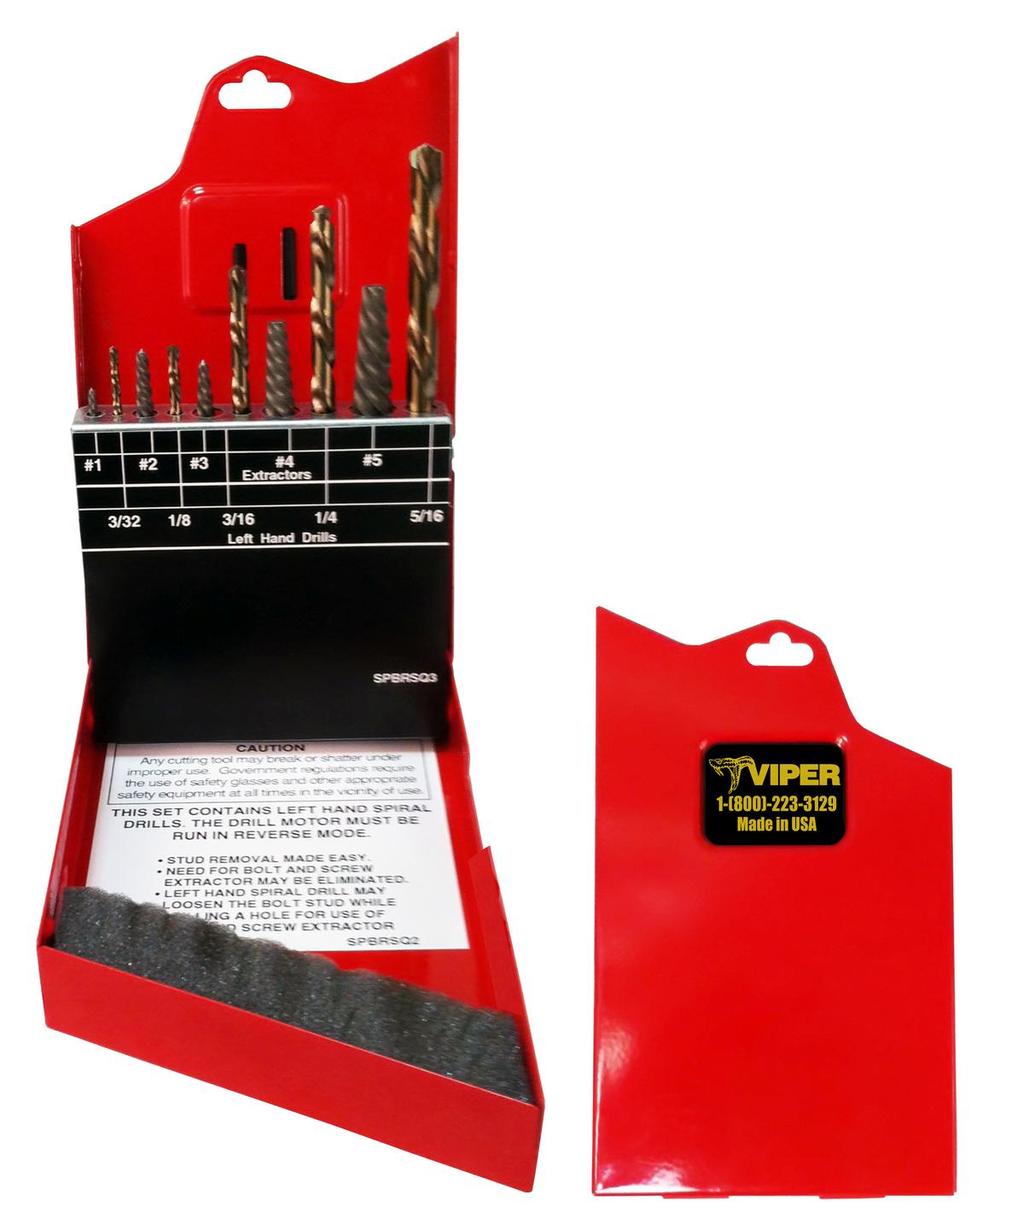 VIPER MAGNUM BOLT REMOVER SET This 10 piece Magnum bolt remover set is USA made for Ace Industrial Supply and proudly displays our Viper logo and toll free phone number in gold lettering on our heavy